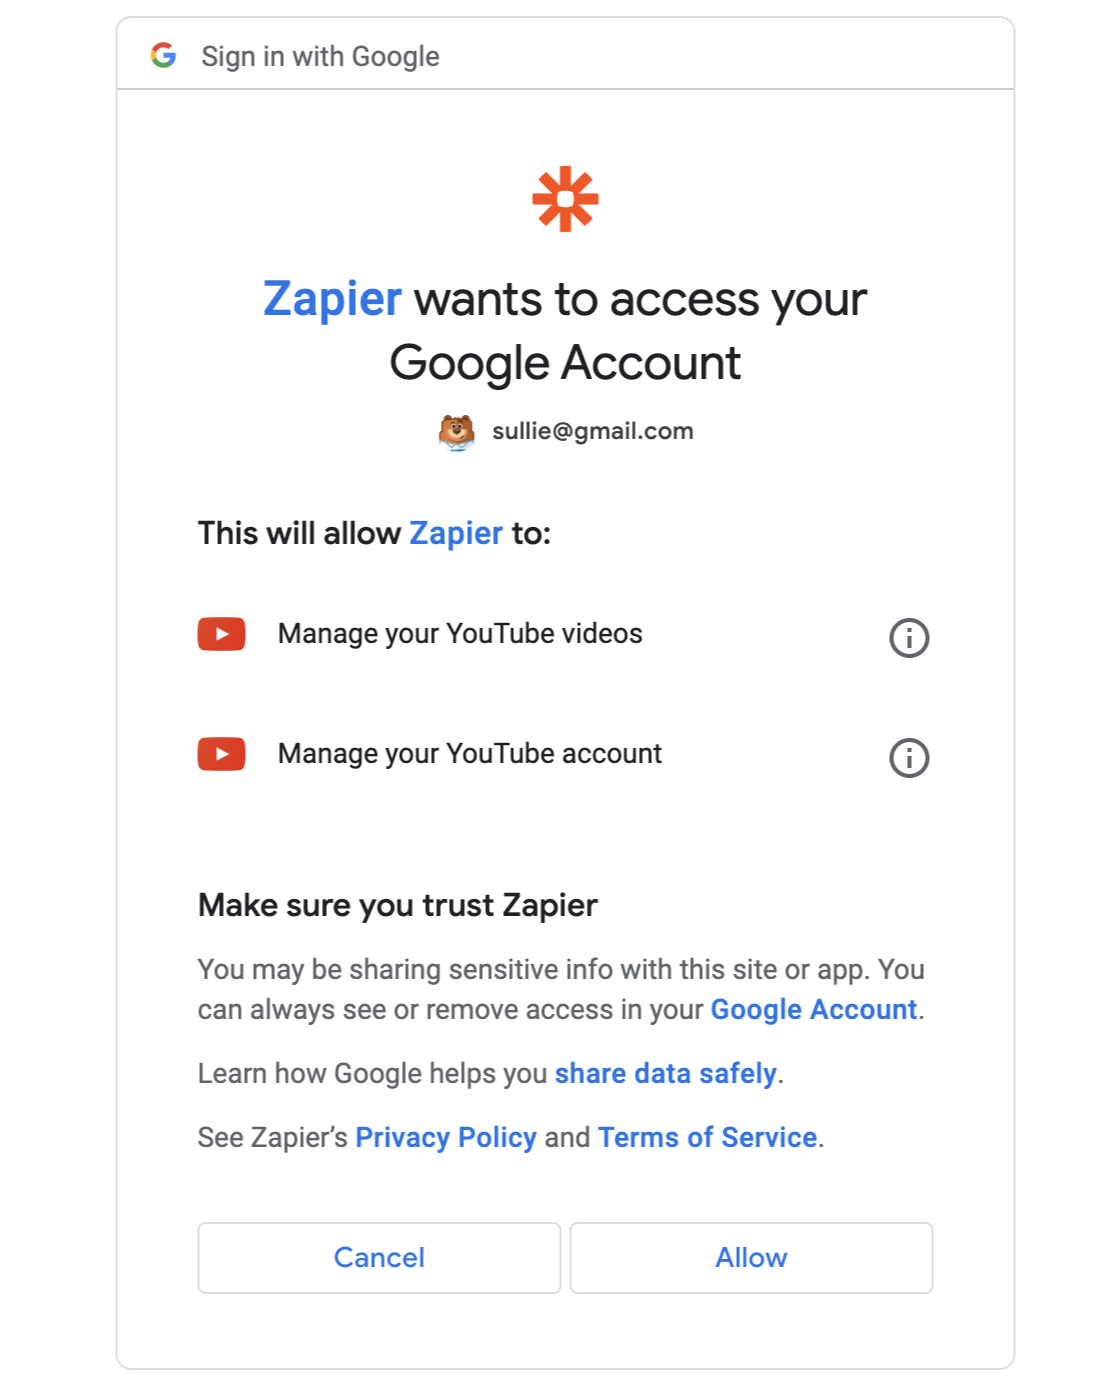 Allowing Zapier to access your YouTube account